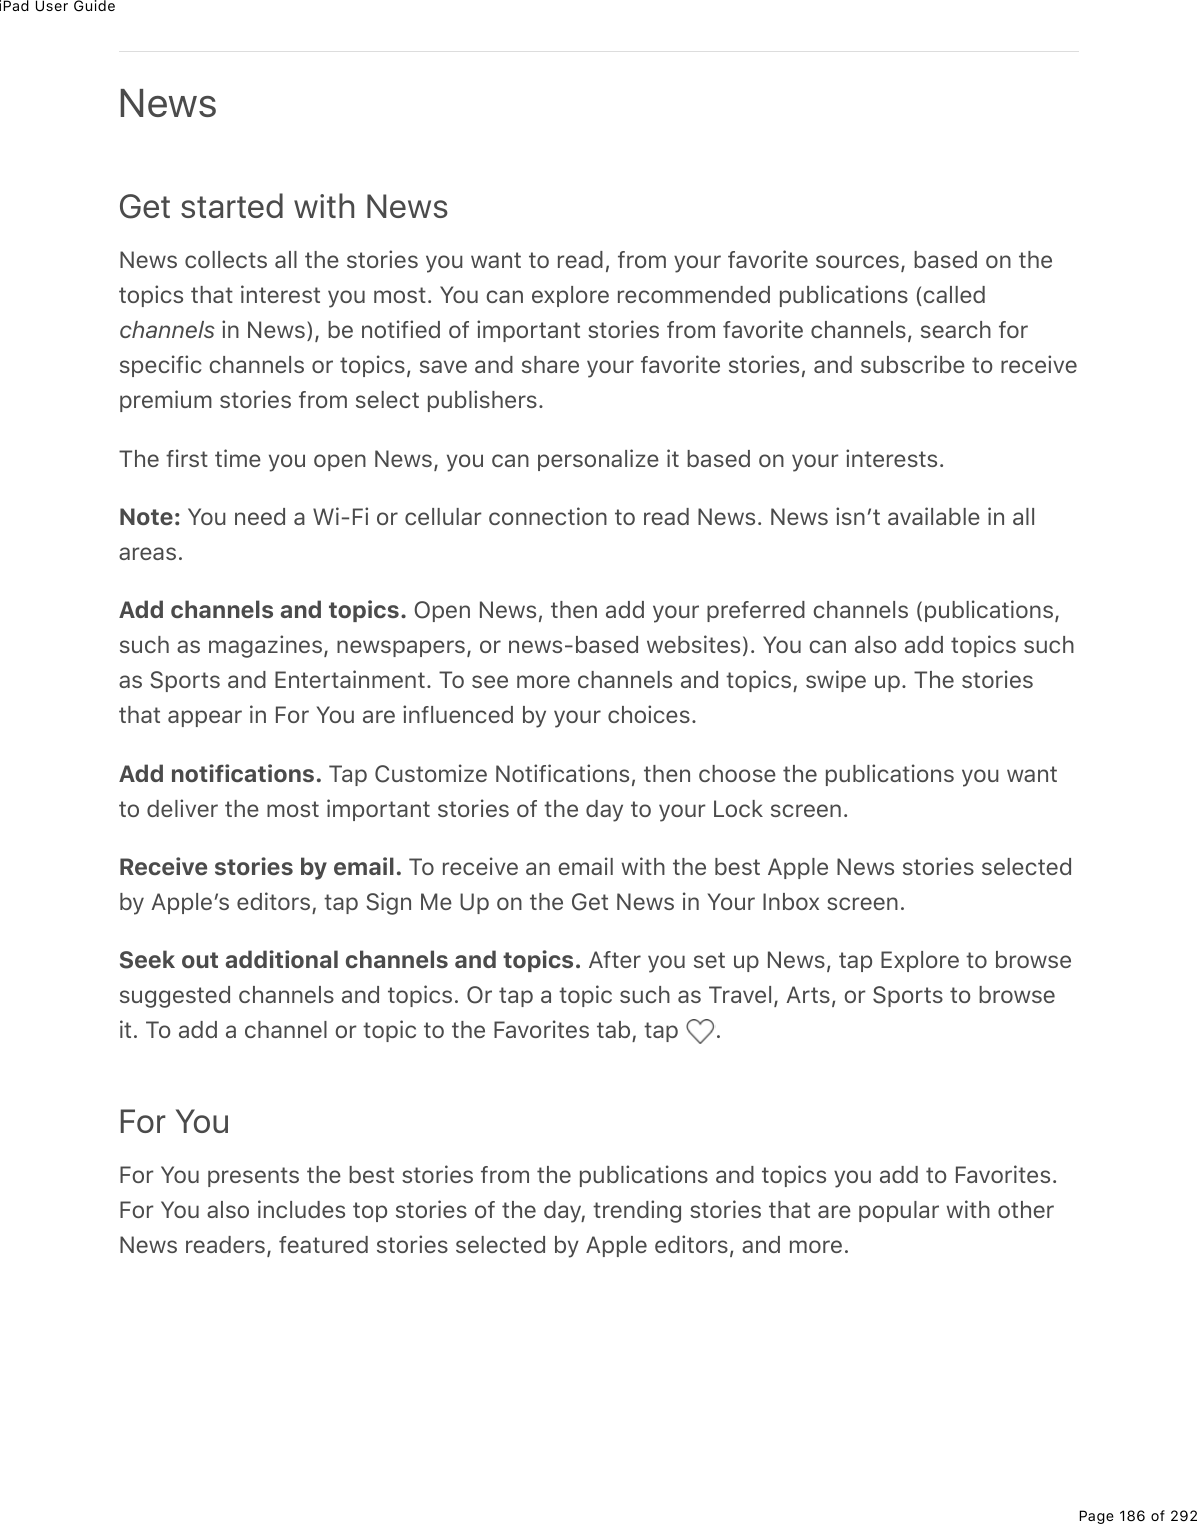 iPad User GuidePage 186 of 292NewsGet started with NewsC(1&amp;%)233()&quot;&amp;%#33%&quot;*(%&amp;&quot;2$.(&amp;%=2&gt;%1#0&quot;%&quot;2%$(#7L%9$2/%=2&gt;$%9#D2$.&quot;(%&amp;2&gt;$)(&amp;L%5#&amp;(7%20%&quot;*(&quot;2-.)&amp;%&quot;*#&quot;%.0&quot;($(&amp;&quot;%=2&gt;%/2&amp;&quot;E%Y2&gt;%)#0%(,-32$(%$()2//(07(7%-&gt;53.)#&quot;.20&amp;%W)#33(7channels%.0%C(1&amp;XL%5(%02&quot;.9.(7%29%./-2$&quot;#0&quot;%&amp;&quot;2$.(&amp;%9$2/%9#D2$.&quot;(%)*#00(3&amp;L%&amp;(#$)*%92$&amp;-().9.)%)*#00(3&amp;%2$%&quot;2-.)&amp;L%&amp;#D(%#07%&amp;*#$(%=2&gt;$%9#D2$.&quot;(%&amp;&quot;2$.(&amp;L%#07%&amp;&gt;5&amp;)$.5(%&quot;2%$()(.D(-$(/.&gt;/%&amp;&quot;2$.(&amp;%9$2/%&amp;(3()&quot;%-&gt;53.&amp;*($&amp;EM*(%9.$&amp;&quot;%&quot;./(%=2&gt;%2-(0%C(1&amp;L%=2&gt;%)#0%-($&amp;20#3.K(%.&quot;%5#&amp;(7%20%=2&gt;$%.0&quot;($(&amp;&quot;&amp;ENote: Y2&gt;%0((7%#%&lt;.QB.%2$%)(33&gt;3#$%)200()&quot;.20%&quot;2%$(#7%C(1&amp;E%C(1&amp;%.&amp;0F&quot;%#D#.3#53(%.0%#33#$(#&amp;EAdd channels and topics. G-(0%C(1&amp;L%&quot;*(0%#77%=2&gt;$%-$(9($$(7%)*#00(3&amp;%W-&gt;53.)#&quot;.20&amp;L&amp;&gt;)*%#&amp;%/#;#K.0(&amp;L%0(1&amp;-#-($&amp;L%2$%0(1&amp;Q5#&amp;(7%1(5&amp;.&quot;(&amp;XE%Y2&gt;%)#0%#3&amp;2%#77%&quot;2-.)&amp;%&amp;&gt;)*#&amp;%!-2$&quot;&amp;%#07%+0&quot;($&quot;#.0/(0&quot;E%M2%&amp;((%/2$(%)*#00(3&amp;%#07%&quot;2-.)&amp;L%&amp;1.-(%&gt;-E%M*(%&amp;&quot;2$.(&amp;&quot;*#&quot;%#--(#$%.0%B2$%Y2&gt;%#$(%.093&gt;(0)(7%5=%=2&gt;$%)*2.)(&amp;EAdd notifications. M#-%4&gt;&amp;&quot;2/.K(%C2&quot;.9.)#&quot;.20&amp;L%&quot;*(0%)*22&amp;(%&quot;*(%-&gt;53.)#&quot;.20&amp;%=2&gt;%1#0&quot;&quot;2%7(3.D($%&quot;*(%/2&amp;&quot;%./-2$&quot;#0&quot;%&amp;&quot;2$.(&amp;%29%&quot;*(%7#=%&quot;2%=2&gt;$%V2)&apos;%&amp;)$((0EReceive stories by email. M2%$()(.D(%#0%(/#.3%1.&quot;*%&quot;*(%5(&amp;&quot;%?--3(%C(1&amp;%&amp;&quot;2$.(&amp;%&amp;(3()&quot;(75=%?--3(F&amp;%(7.&quot;2$&amp;L%&quot;#-%!.;0%8(%Z-%20%&quot;*(%6(&quot;%C(1&amp;%.0%Y2&gt;$%S052,%&amp;)$((0ESeek out additional channels and topics. ?9&quot;($%=2&gt;%&amp;(&quot;%&gt;-%C(1&amp;L%&quot;#-%+,-32$(%&quot;2%5$21&amp;(&amp;&gt;;;(&amp;&quot;(7%)*#00(3&amp;%#07%&quot;2-.)&amp;E%G$%&quot;#-%#%&quot;2-.)%&amp;&gt;)*%#&amp;%M$#D(3L%?$&quot;&amp;L%2$%!-2$&quot;&amp;%&quot;2%5$21&amp;(.&quot;E%M2%#77%#%)*#00(3%2$%&quot;2-.)%&quot;2%&quot;*(%B#D2$.&quot;(&amp;%&quot;#5L%&quot;#-% EFor YouB2$%Y2&gt;%-$(&amp;(0&quot;&amp;%&quot;*(%5(&amp;&quot;%&amp;&quot;2$.(&amp;%9$2/%&quot;*(%-&gt;53.)#&quot;.20&amp;%#07%&quot;2-.)&amp;%=2&gt;%#77%&quot;2%B#D2$.&quot;(&amp;EB2$%Y2&gt;%#3&amp;2%.0)3&gt;7(&amp;%&quot;2-%&amp;&quot;2$.(&amp;%29%&quot;*(%7#=L%&quot;$(07.0;%&amp;&quot;2$.(&amp;%&quot;*#&quot;%#$(%-2-&gt;3#$%1.&quot;*%2&quot;*($C(1&amp;%$(#7($&amp;L%9(#&quot;&gt;$(7%&amp;&quot;2$.(&amp;%&amp;(3()&quot;(7%5=%?--3(%(7.&quot;2$&amp;L%#07%/2$(E